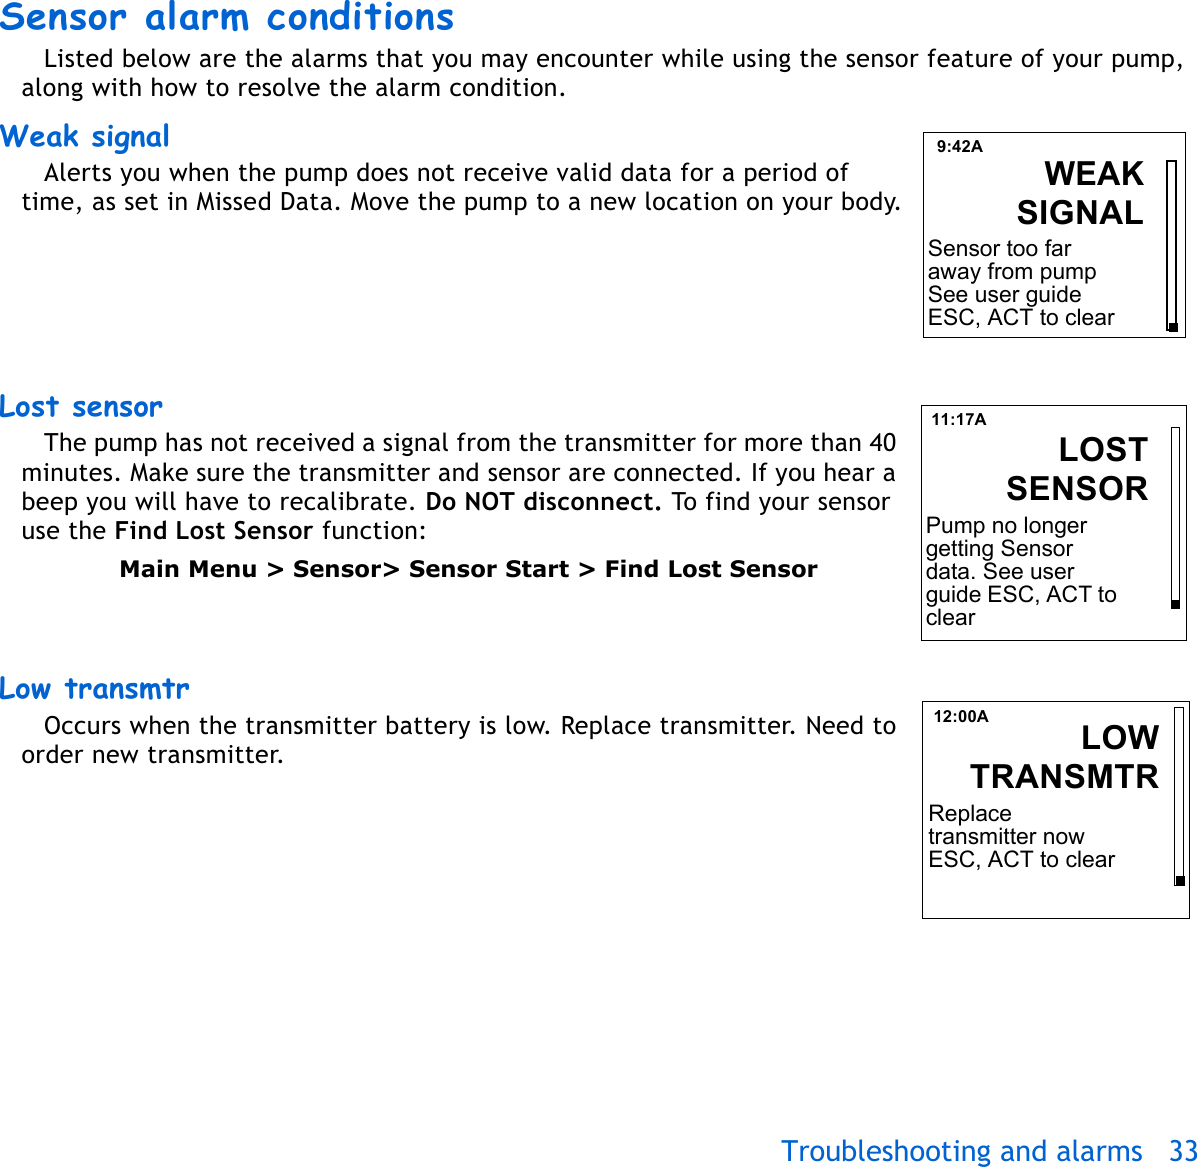 Troubleshooting and alarms 33 Sensor alarm conditions Listed below are the alarms that you may encounter while using the sensor feature of your pump, along with how to resolve the alarm condition.Weak signal Alerts you when the pump does not receive valid data for a period of time, as set in Missed Data. Move the pump to a new location on your body.Lost sensor The pump has not received a signal from the transmitter for more than 40 minutes. Make sure the transmitter and sensor are connected. If you hear a beep you will have to recalibrate. Do NOT disconnect. To find your sensor use the Find Lost Sensor function:Main Menu &gt; Sensor&gt; Sensor Start &gt; Find Lost SensorLow transmtr Occurs when the transmitter battery is low. Replace transmitter. Need to order new transmitter. 9:42ASelect PatternsWEAKSIGNALSensor too far away from pump See user guide ESC, ACT to clear11:17ALOSTSENSORPump no longer getting Sensor data. See user guide ESC, ACT to clear12:00A LOWTRANSMTRReplace transmitter now ESC, ACT to clear